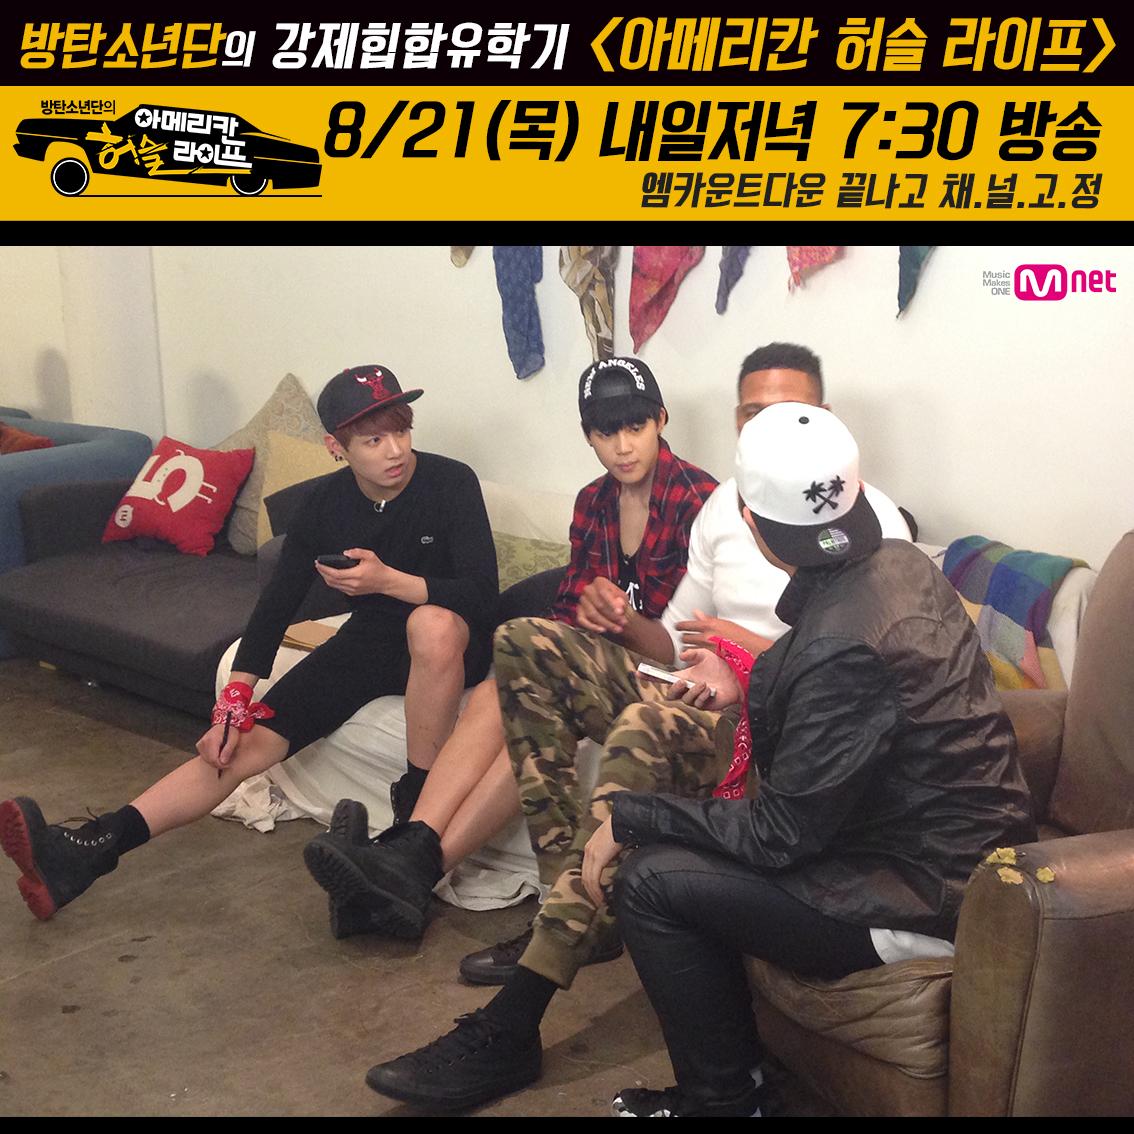 [Picture] BTS American Hustle Life at Mnet FB&Twitter